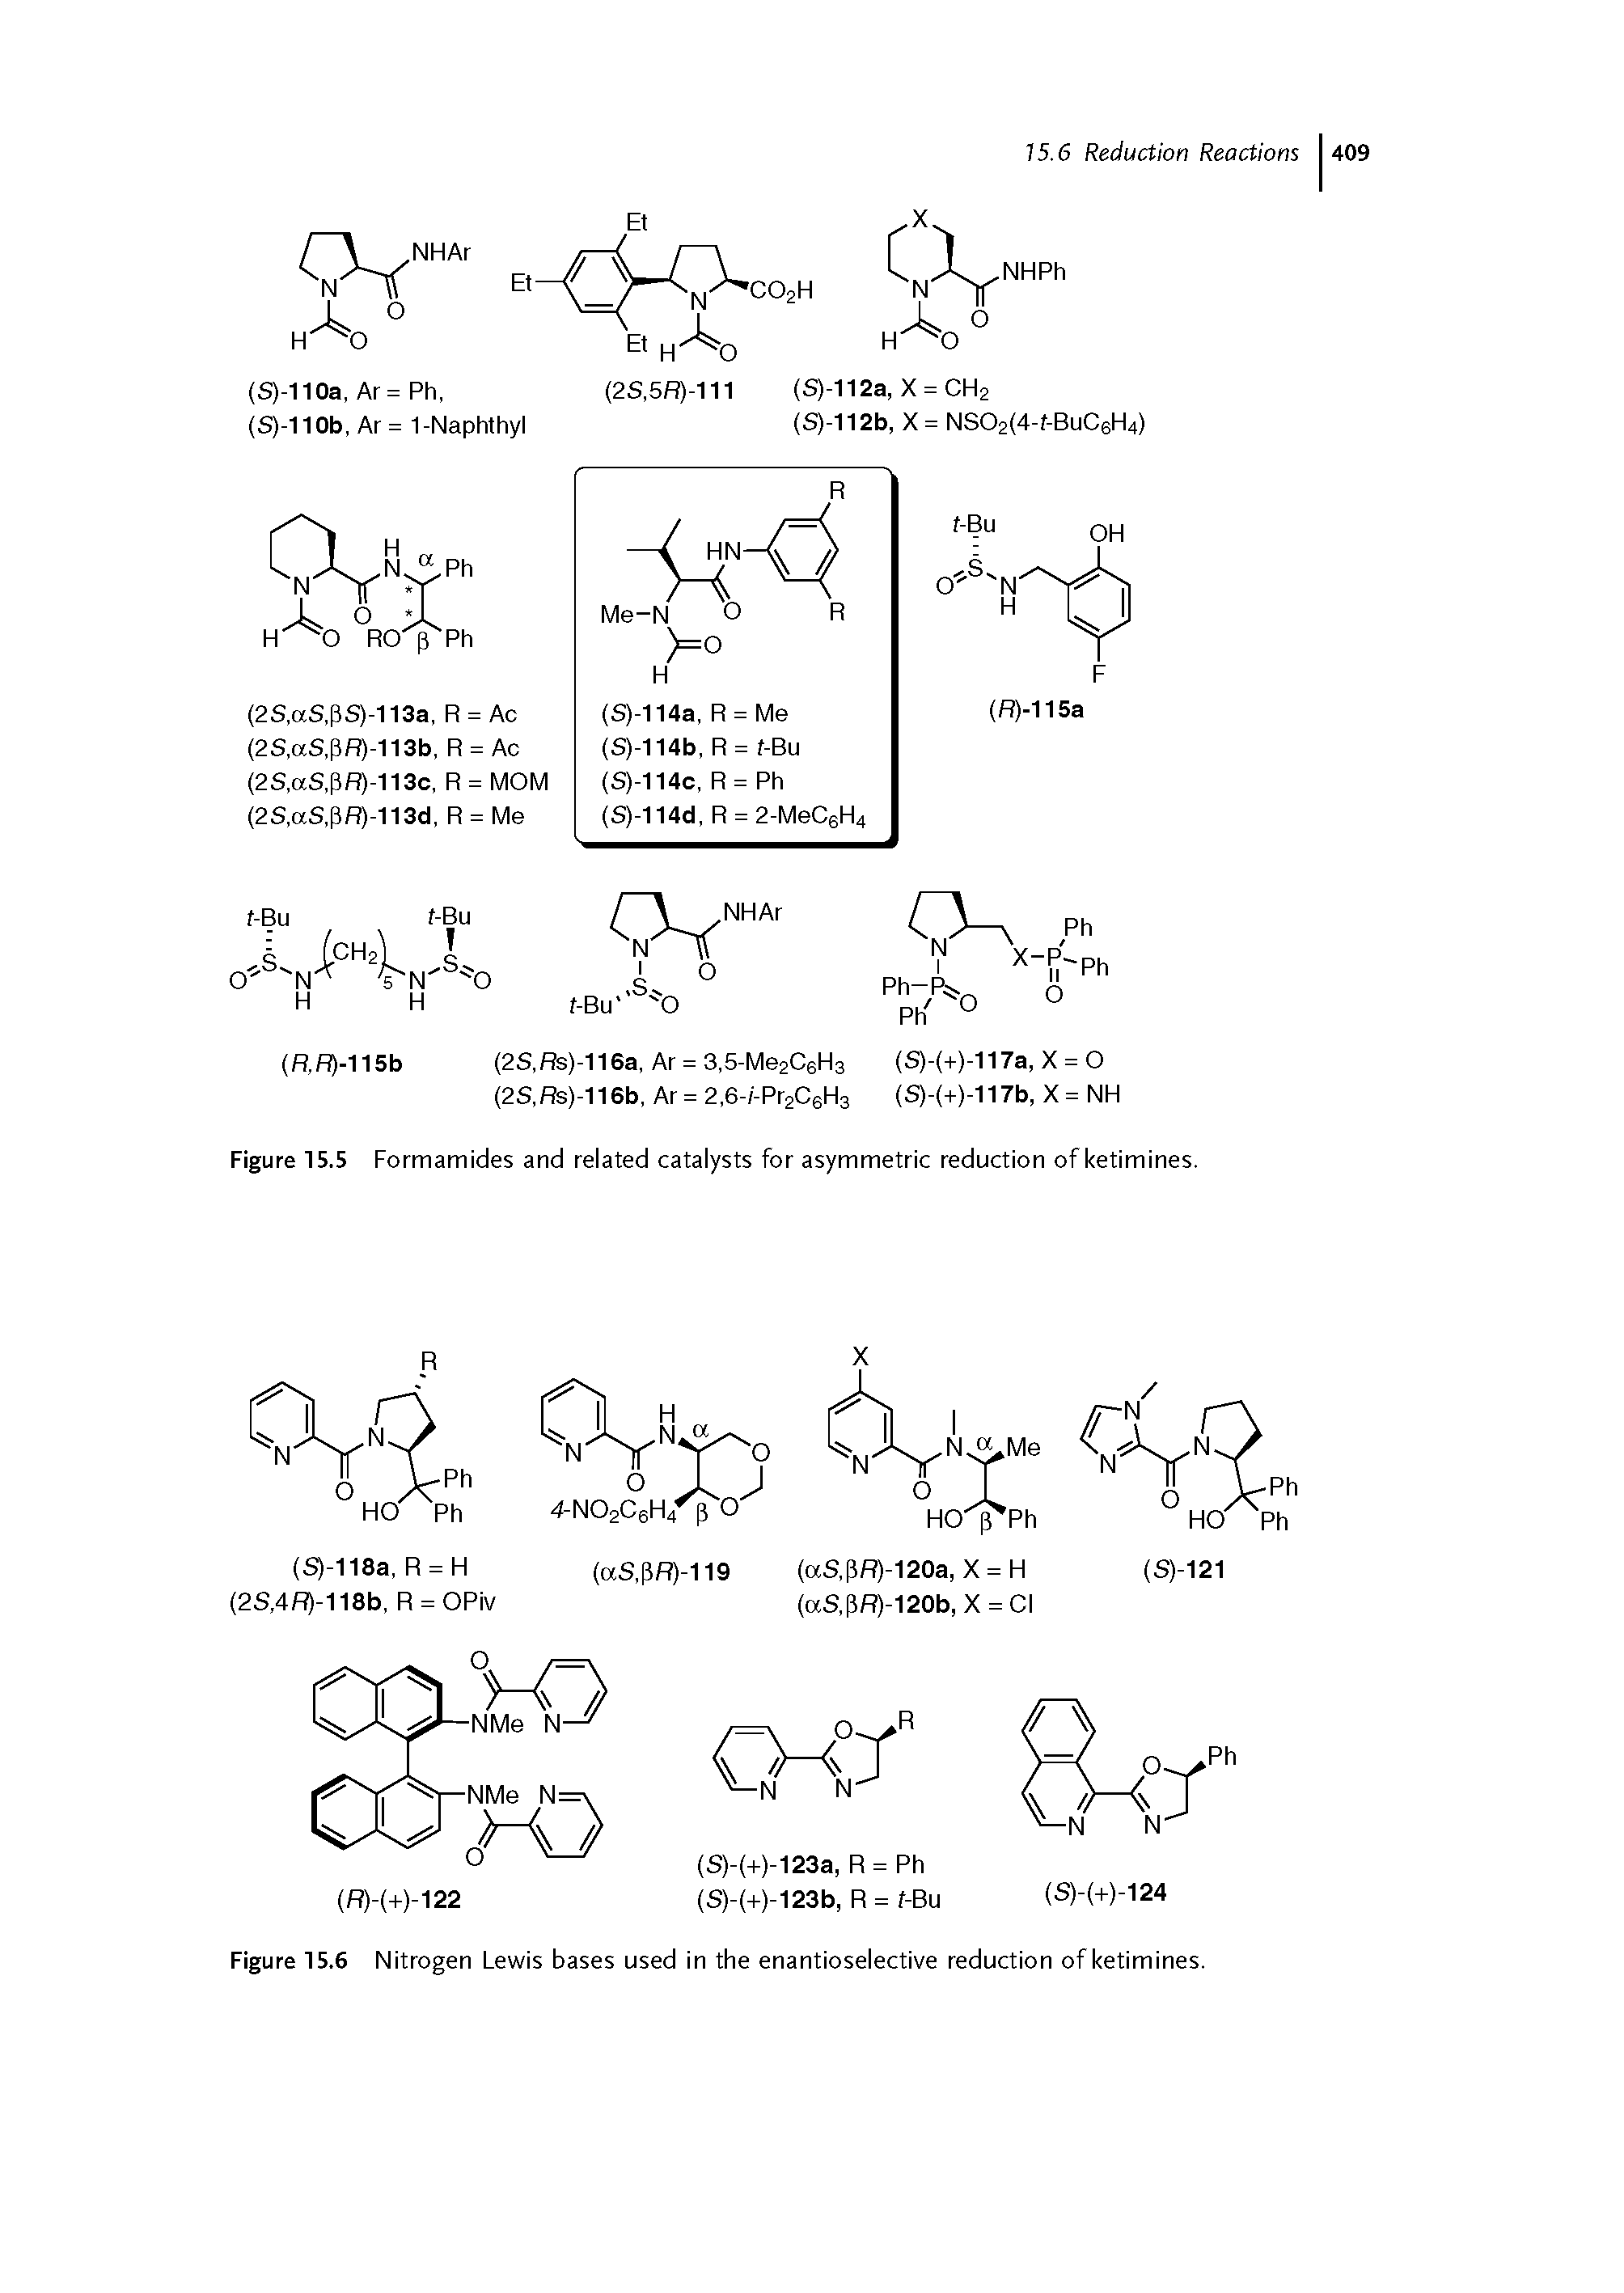 Figure 15.5 Formamides and related catalysts for asymmetric reduction of ketimines.